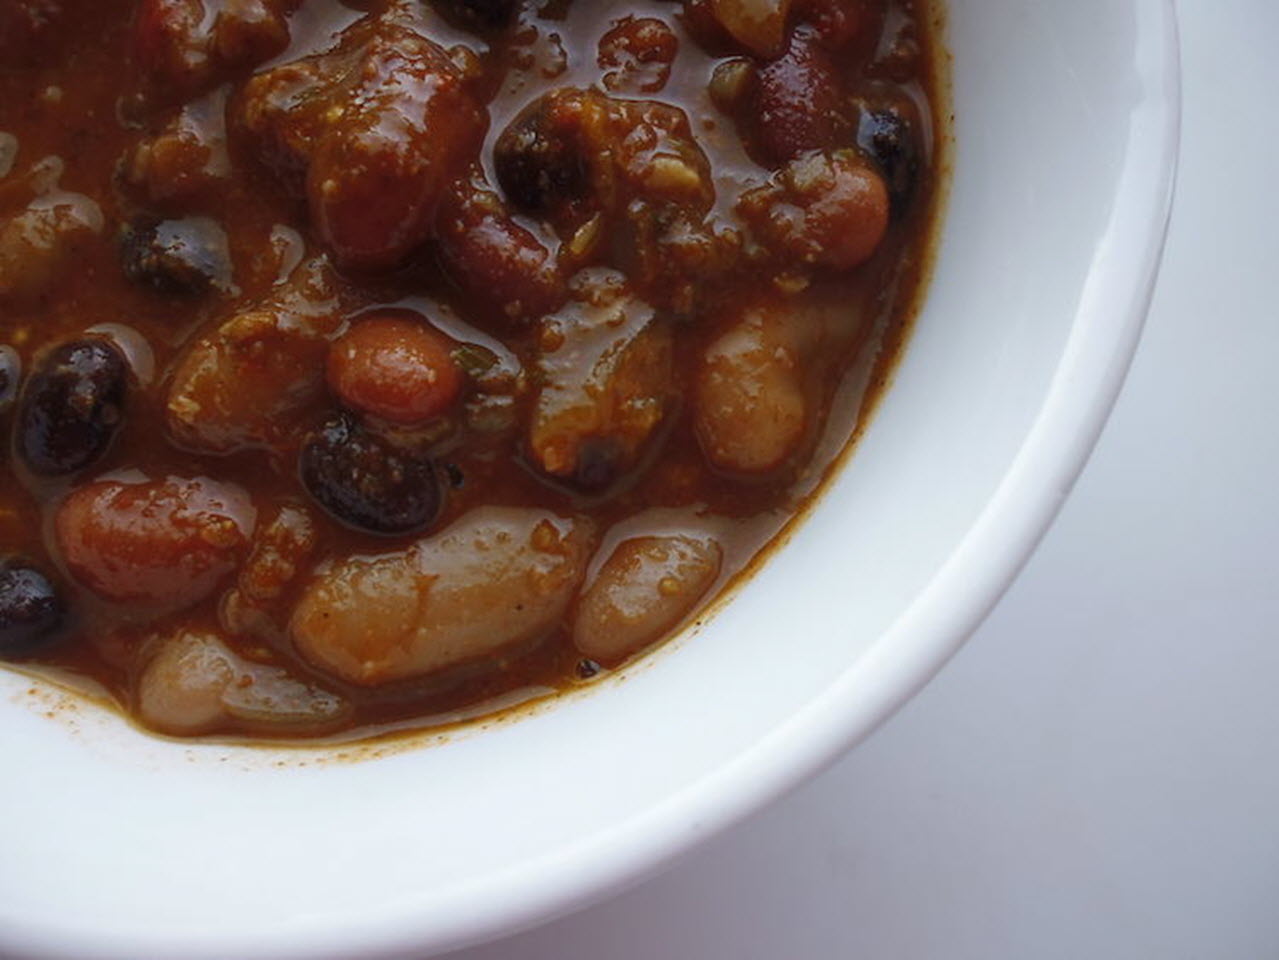 Vegan Chili con Carne with Beans